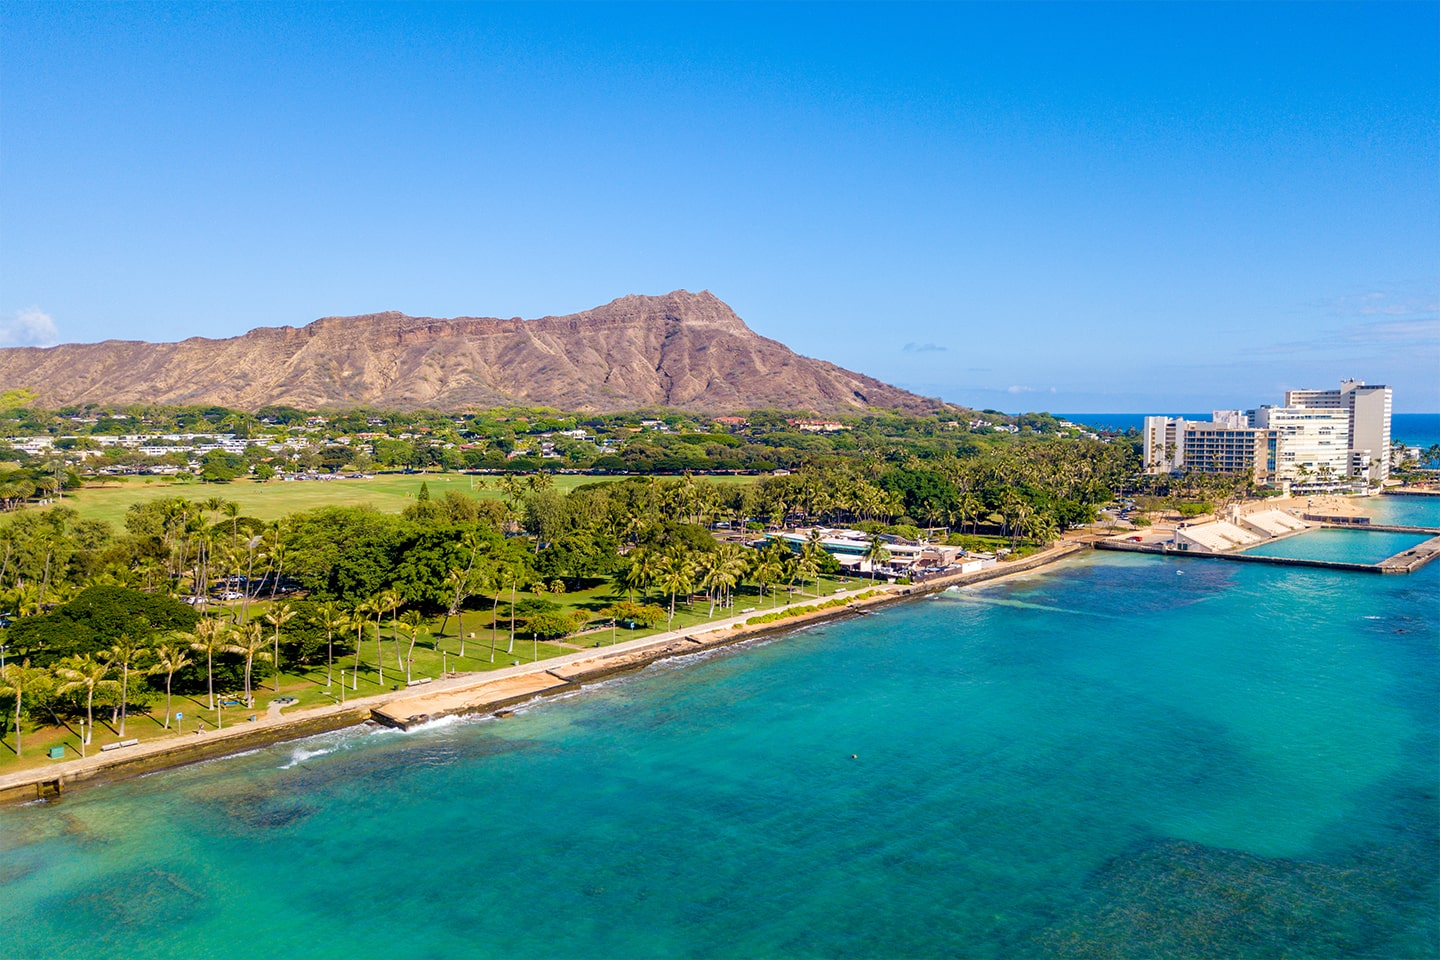 Customize your tour that can bring you the best experience on Oahu.